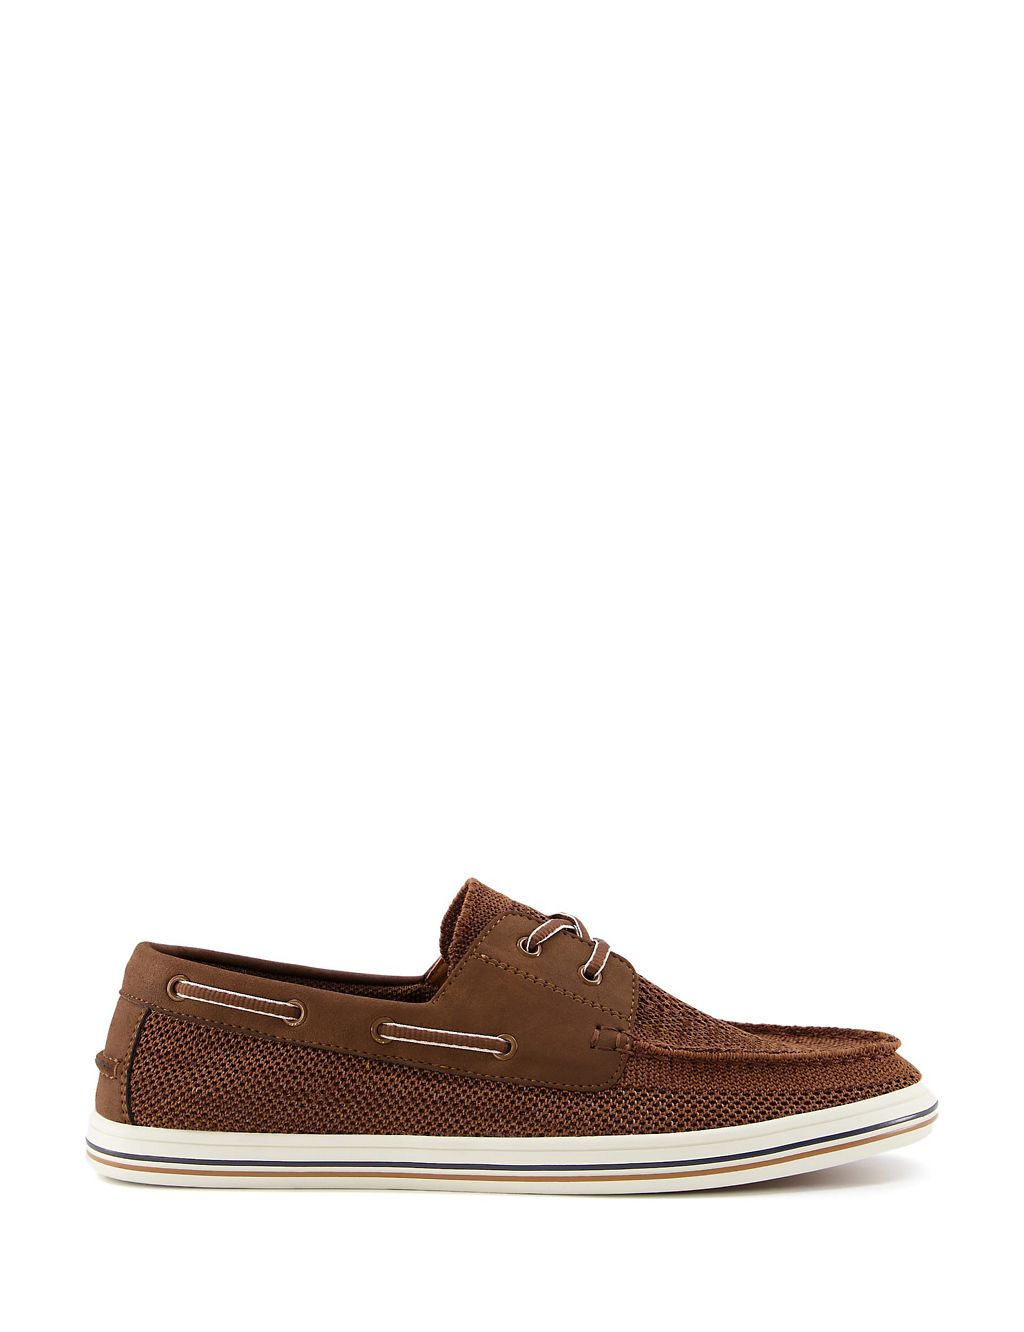 Lace Up Flat Boat Shoes 3 of 4